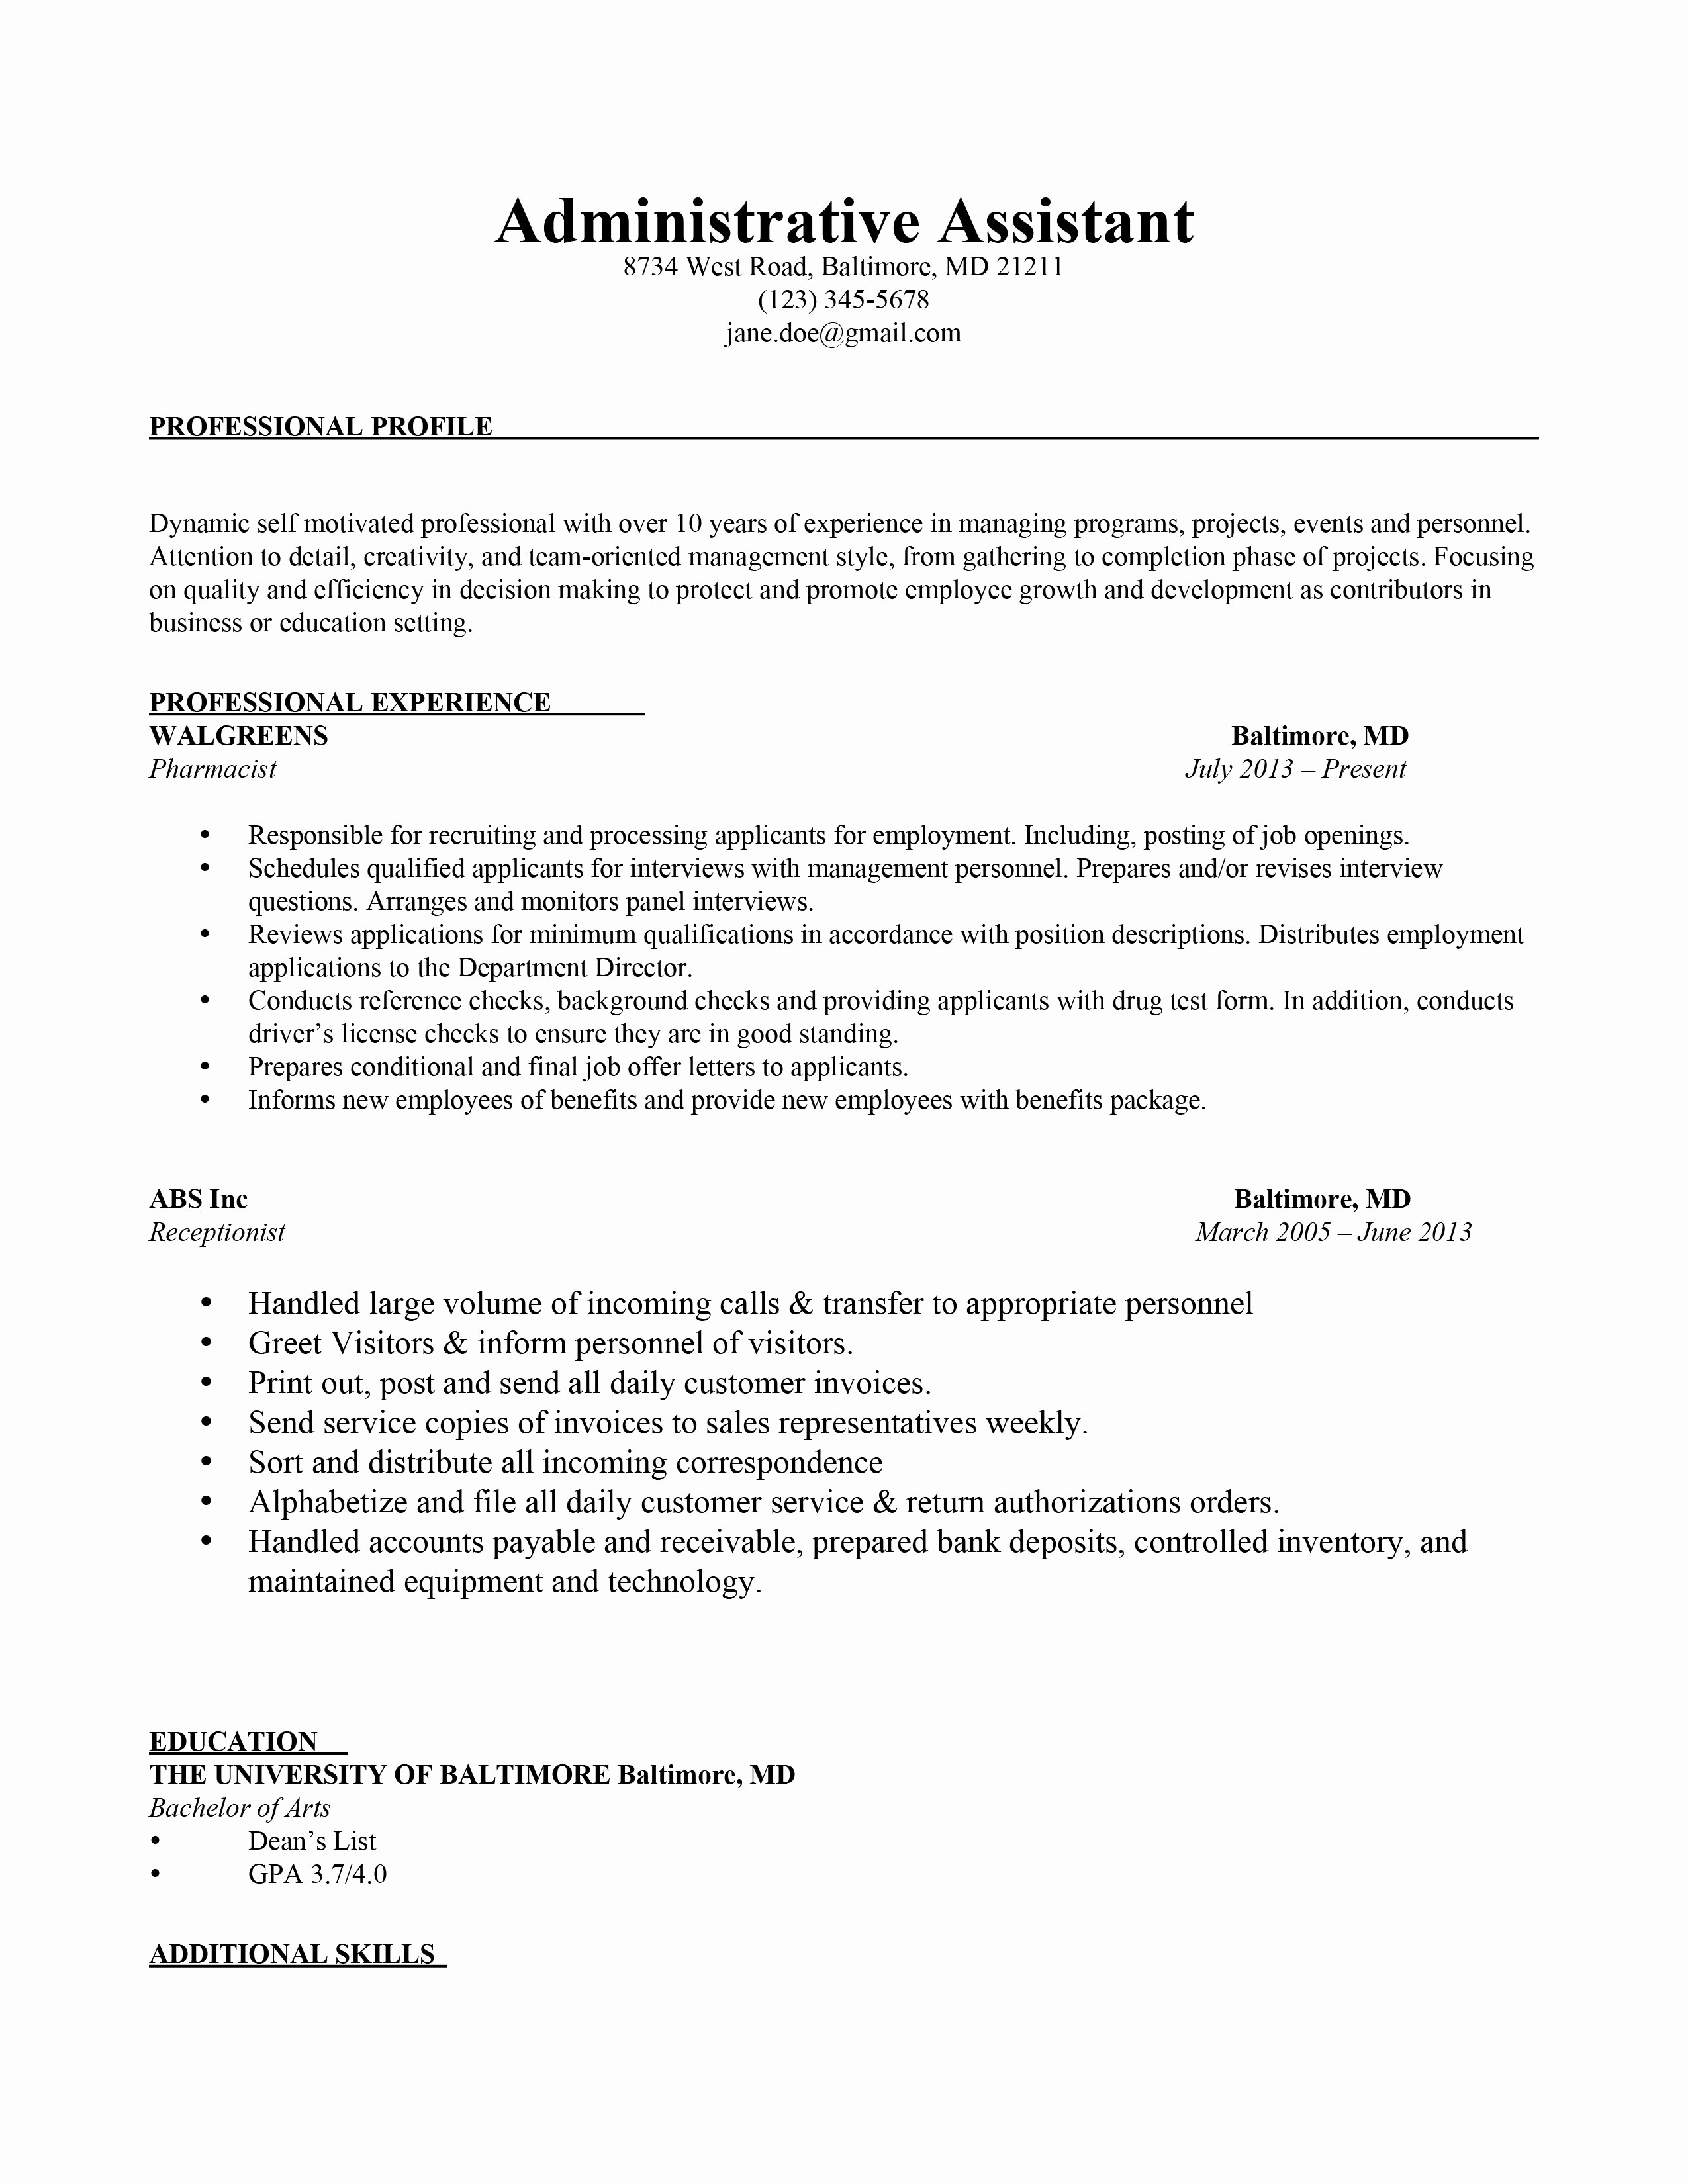 Cover Letter Template for Administrative assistant Job - Examples Resume Cover Letters Best New Example Cover Letter